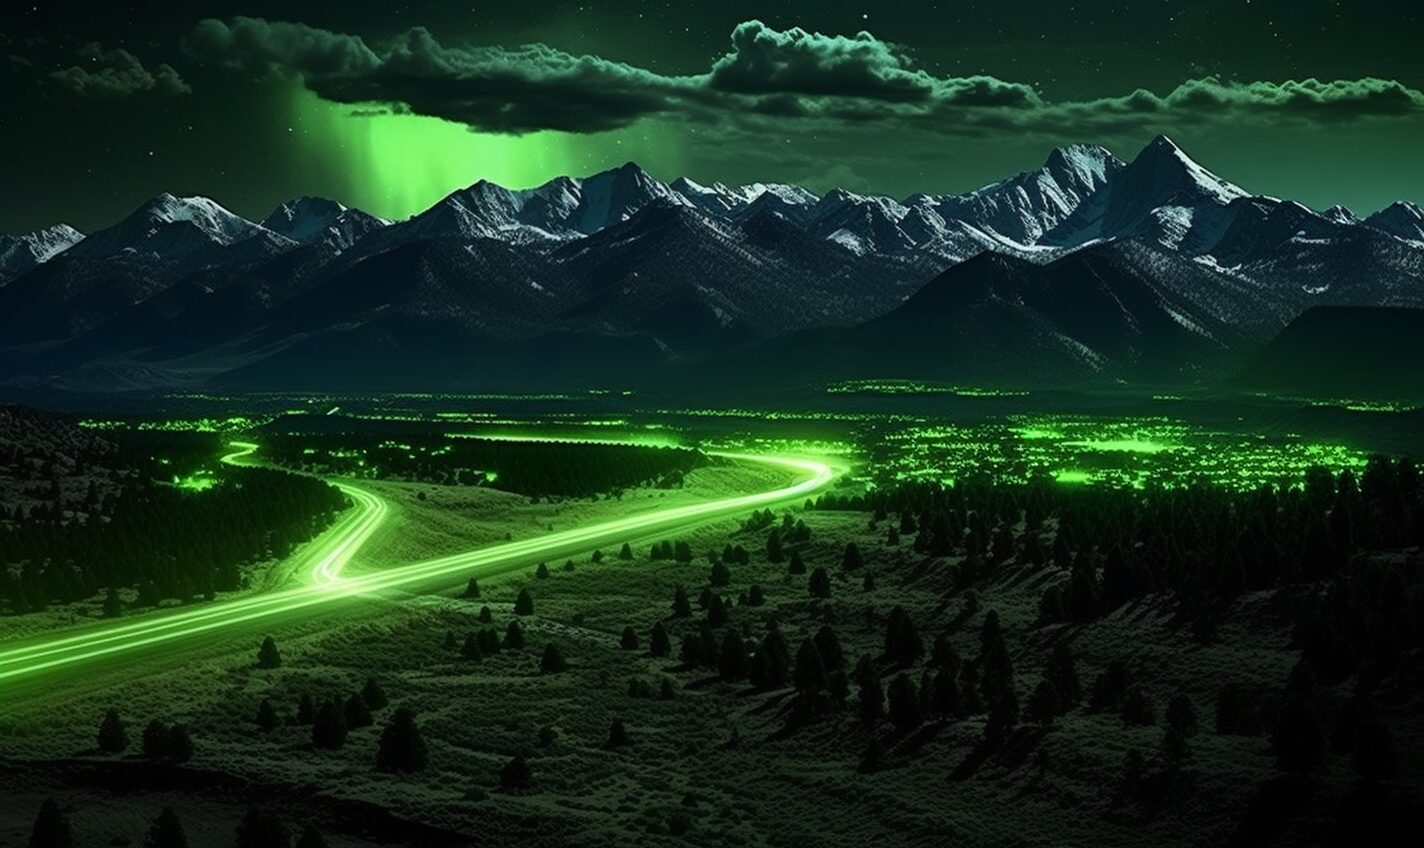 lakewood, colorado in black and neon green glow